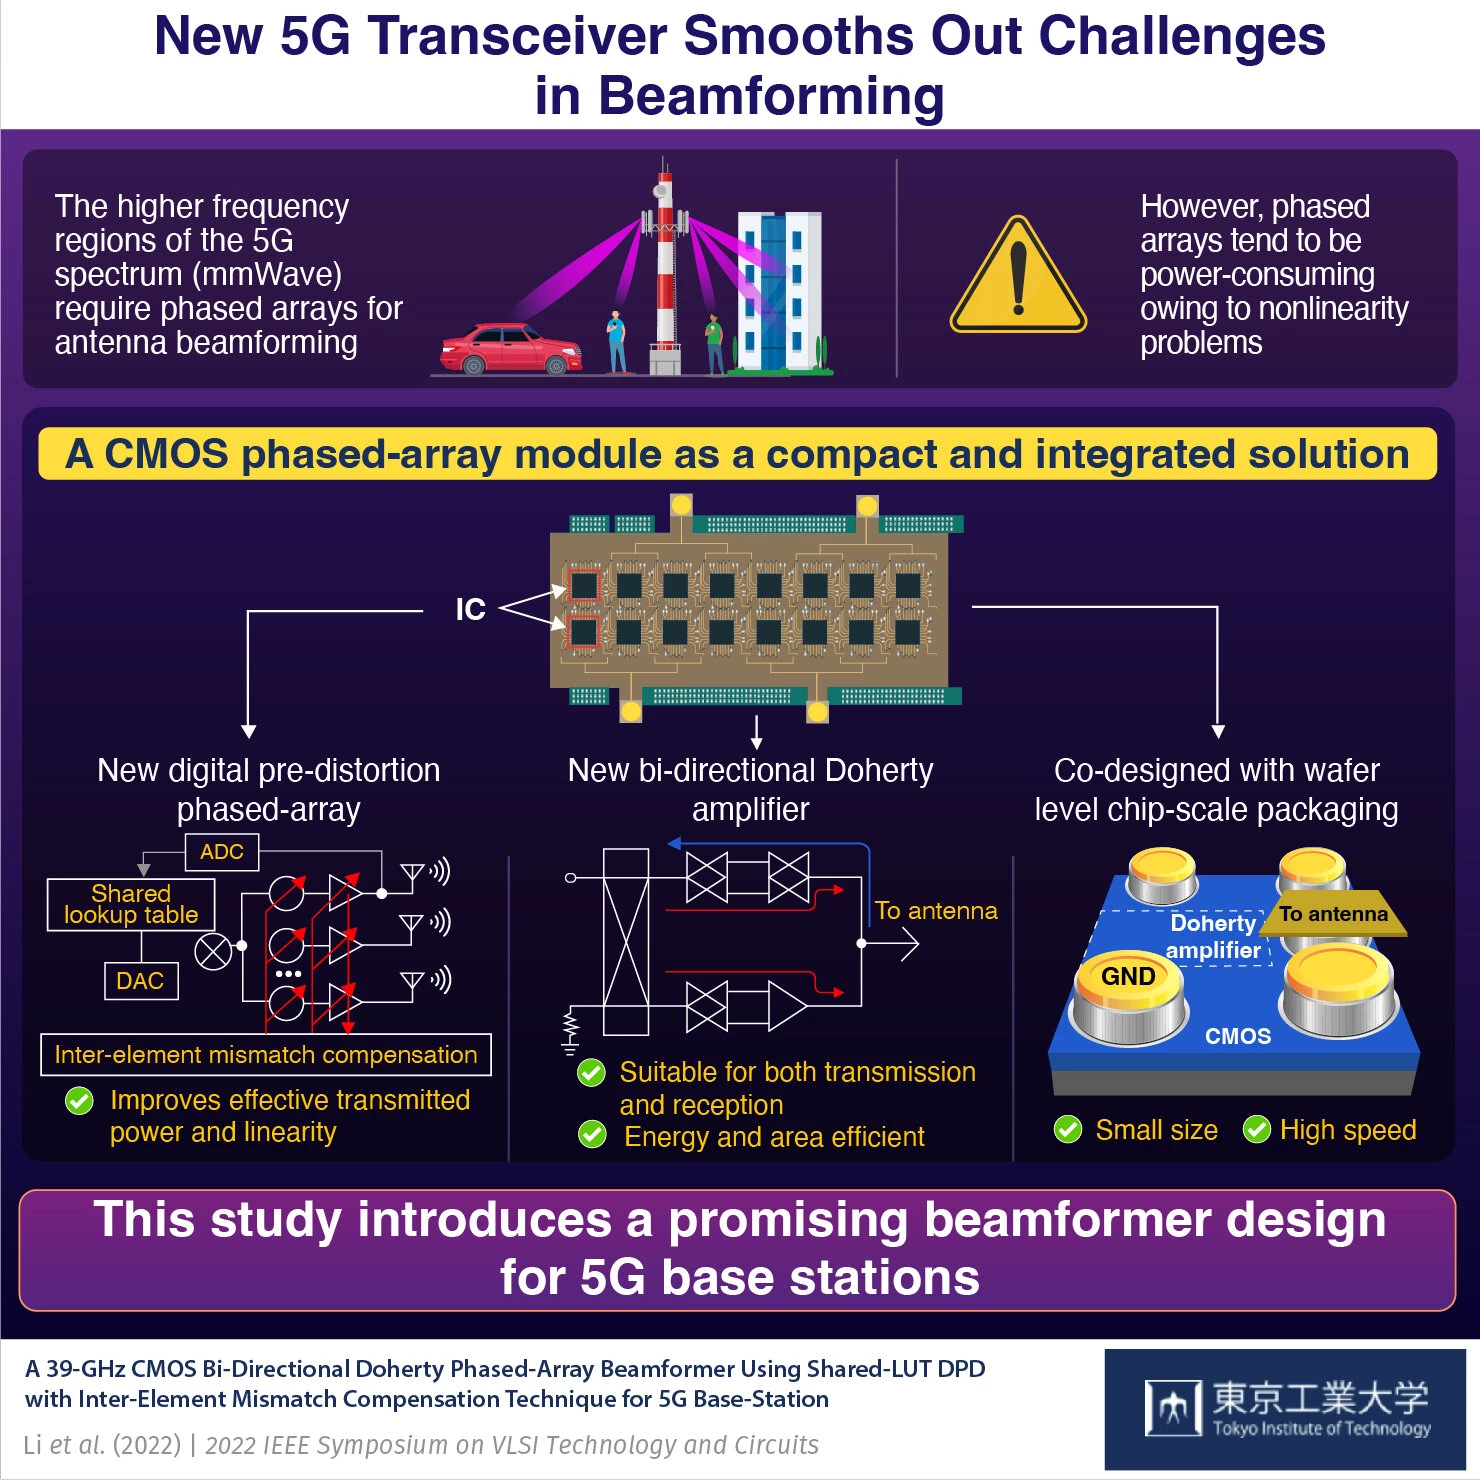 New transceiver that can access the higher frequency bands utilized by 5G networks.